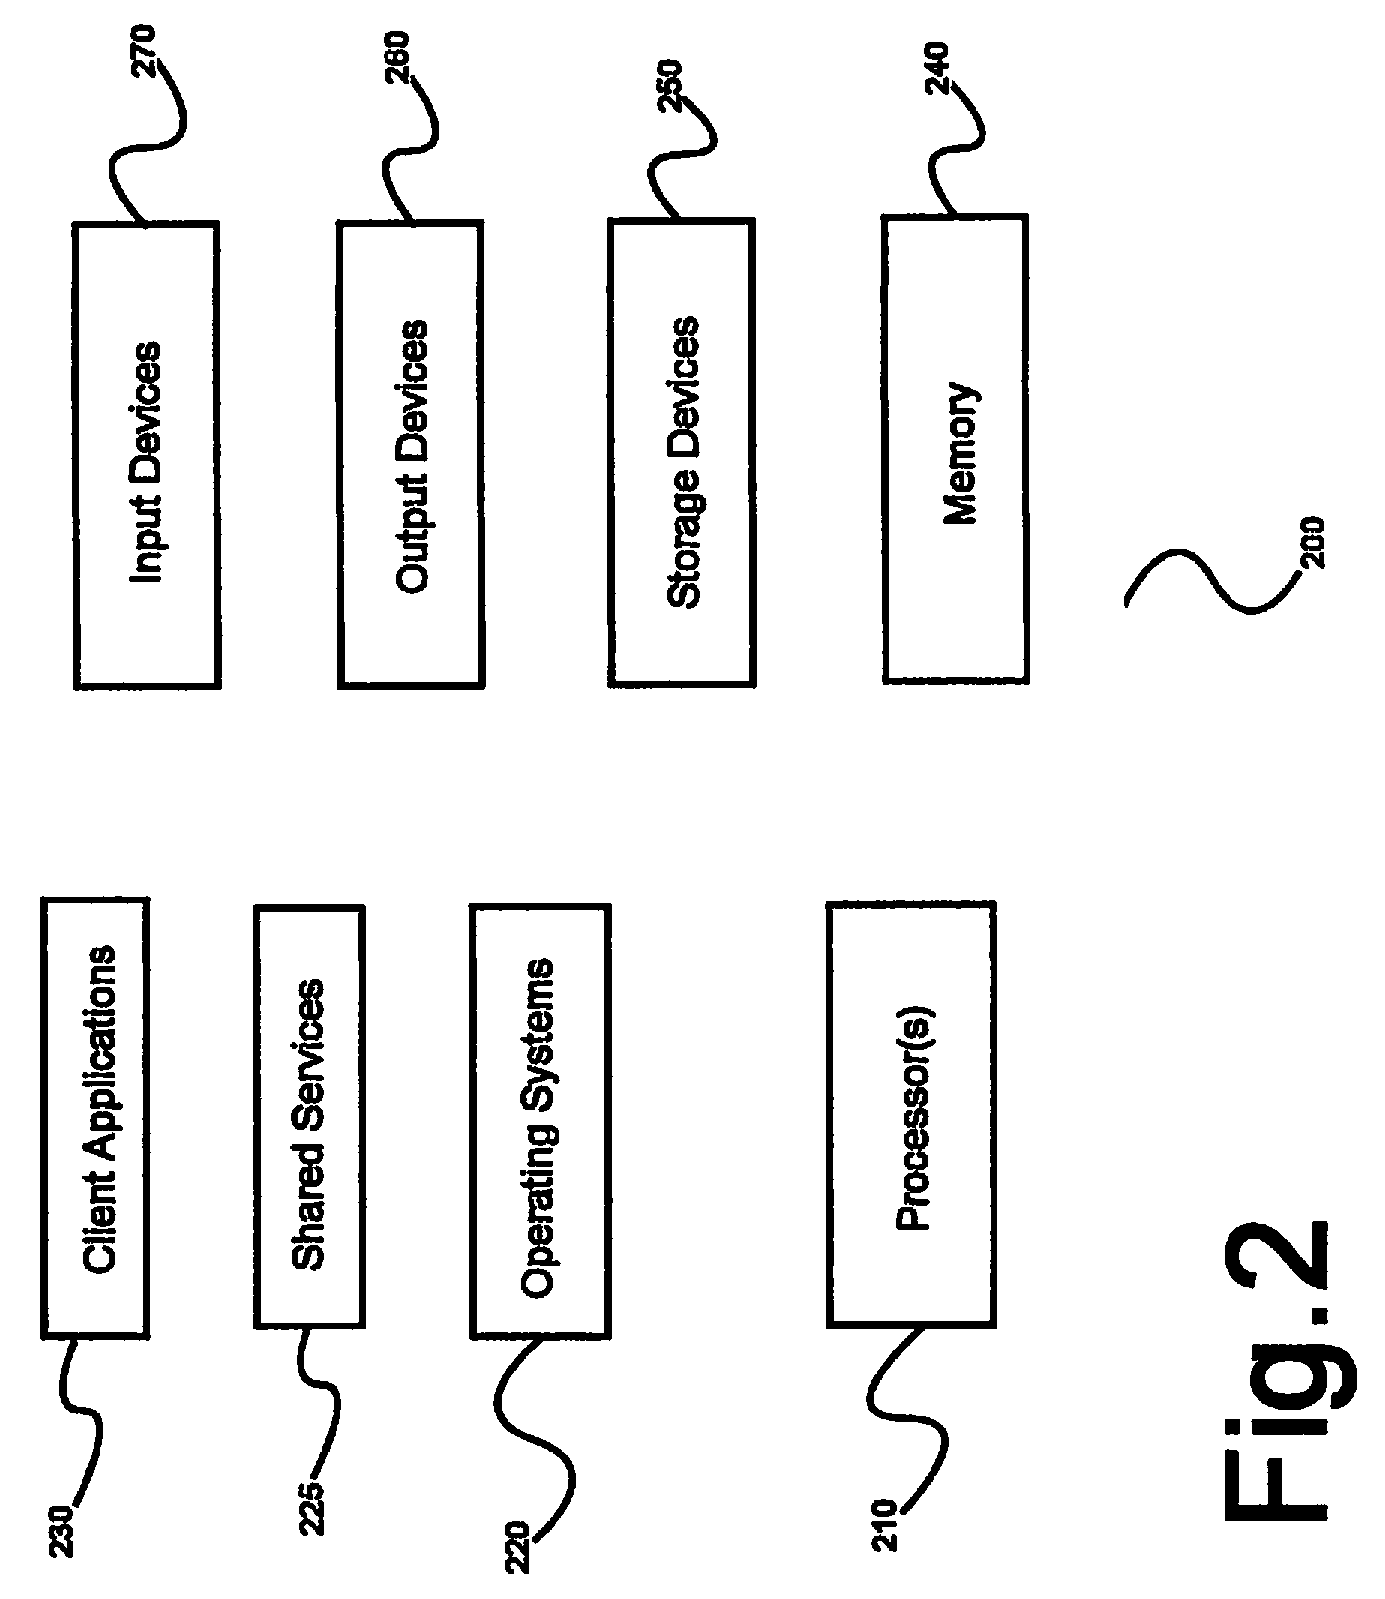 System and method for optimized and distributed resource management